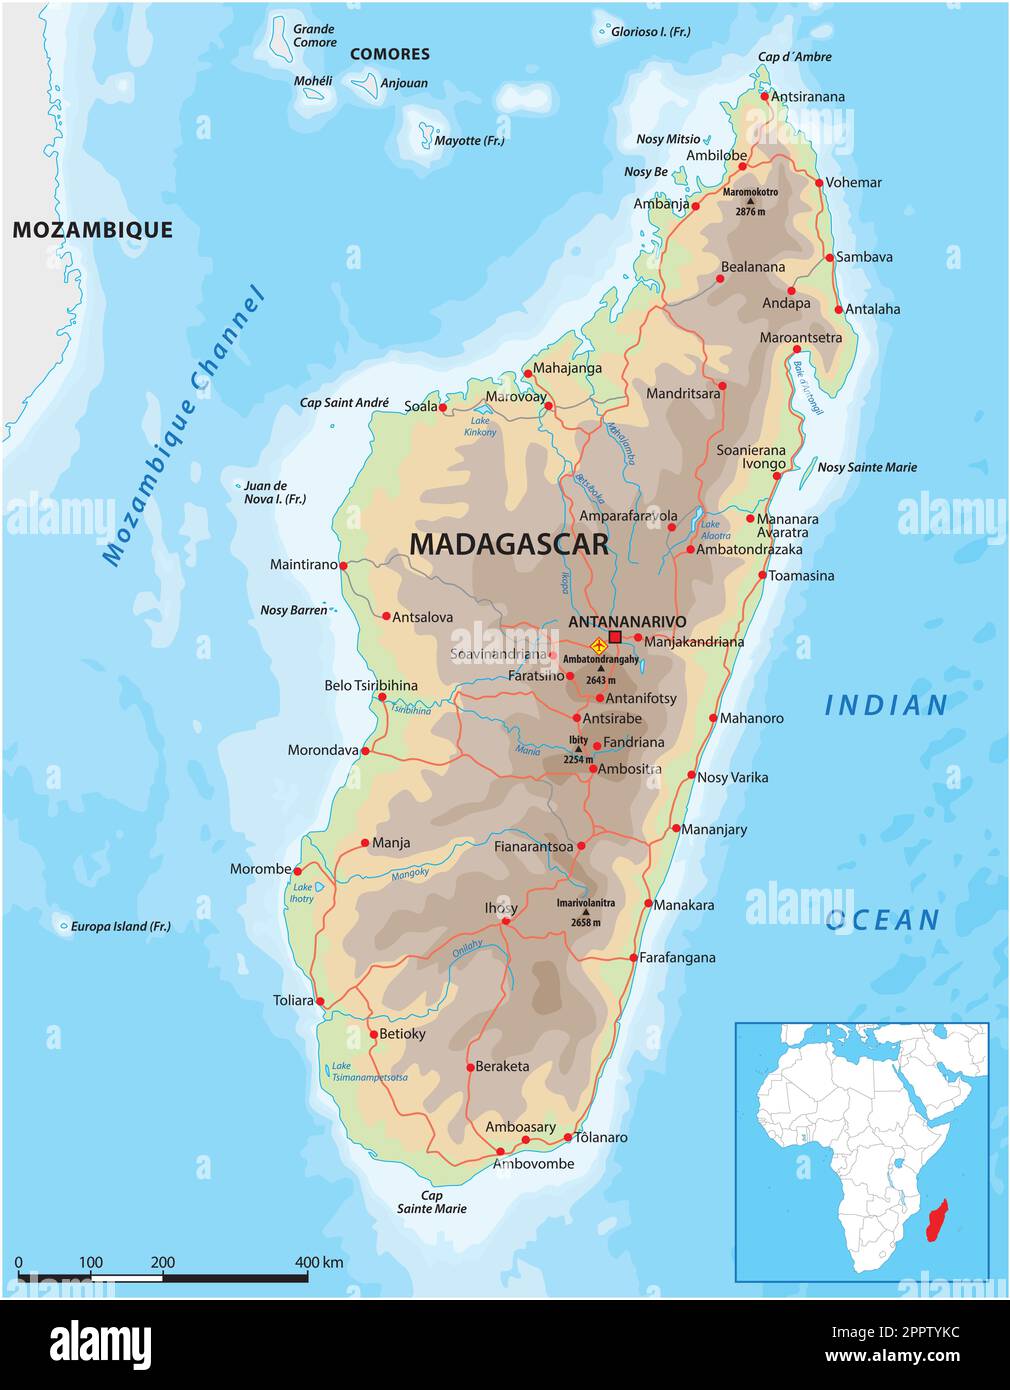 Detailed vector road map of the island nation of Madagascar Stock ...